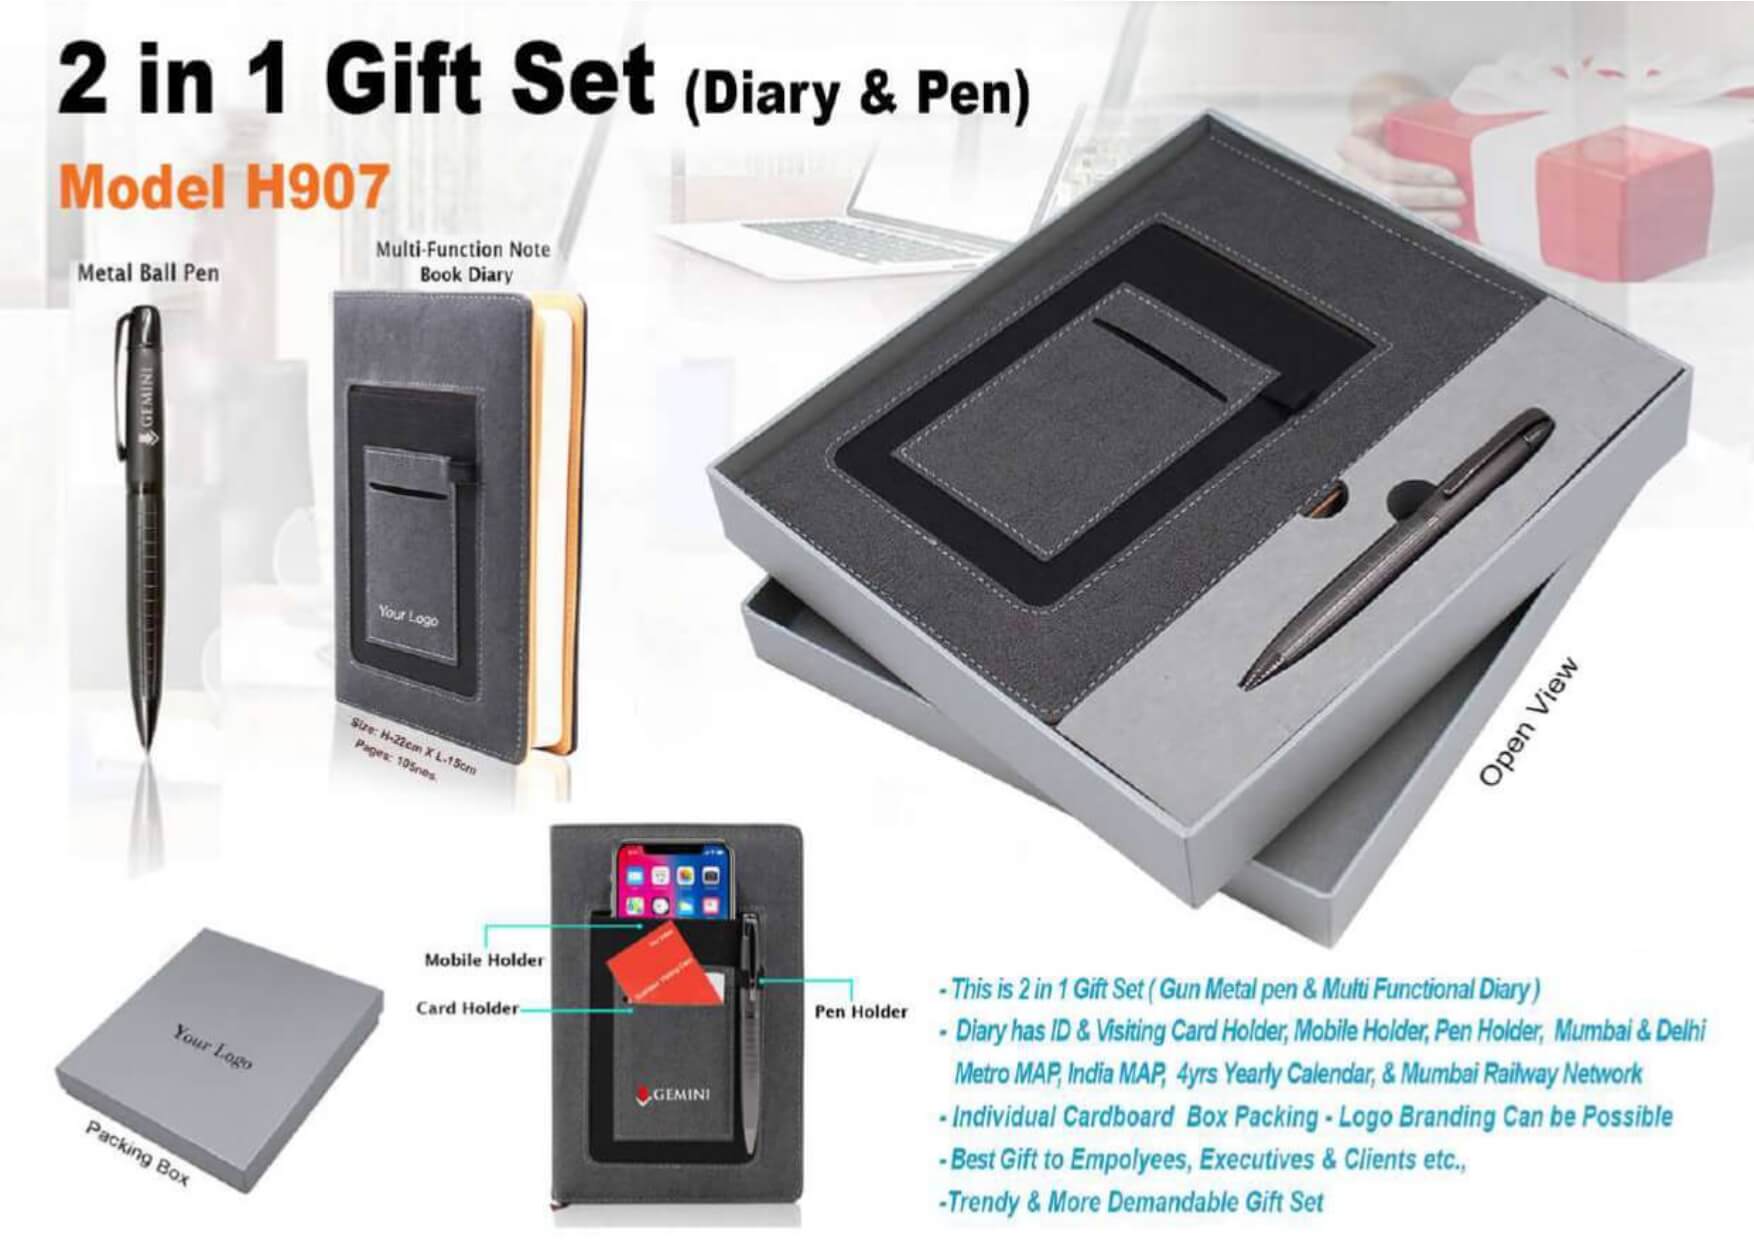 2 in 1 Gift Set Diary and Pen 907